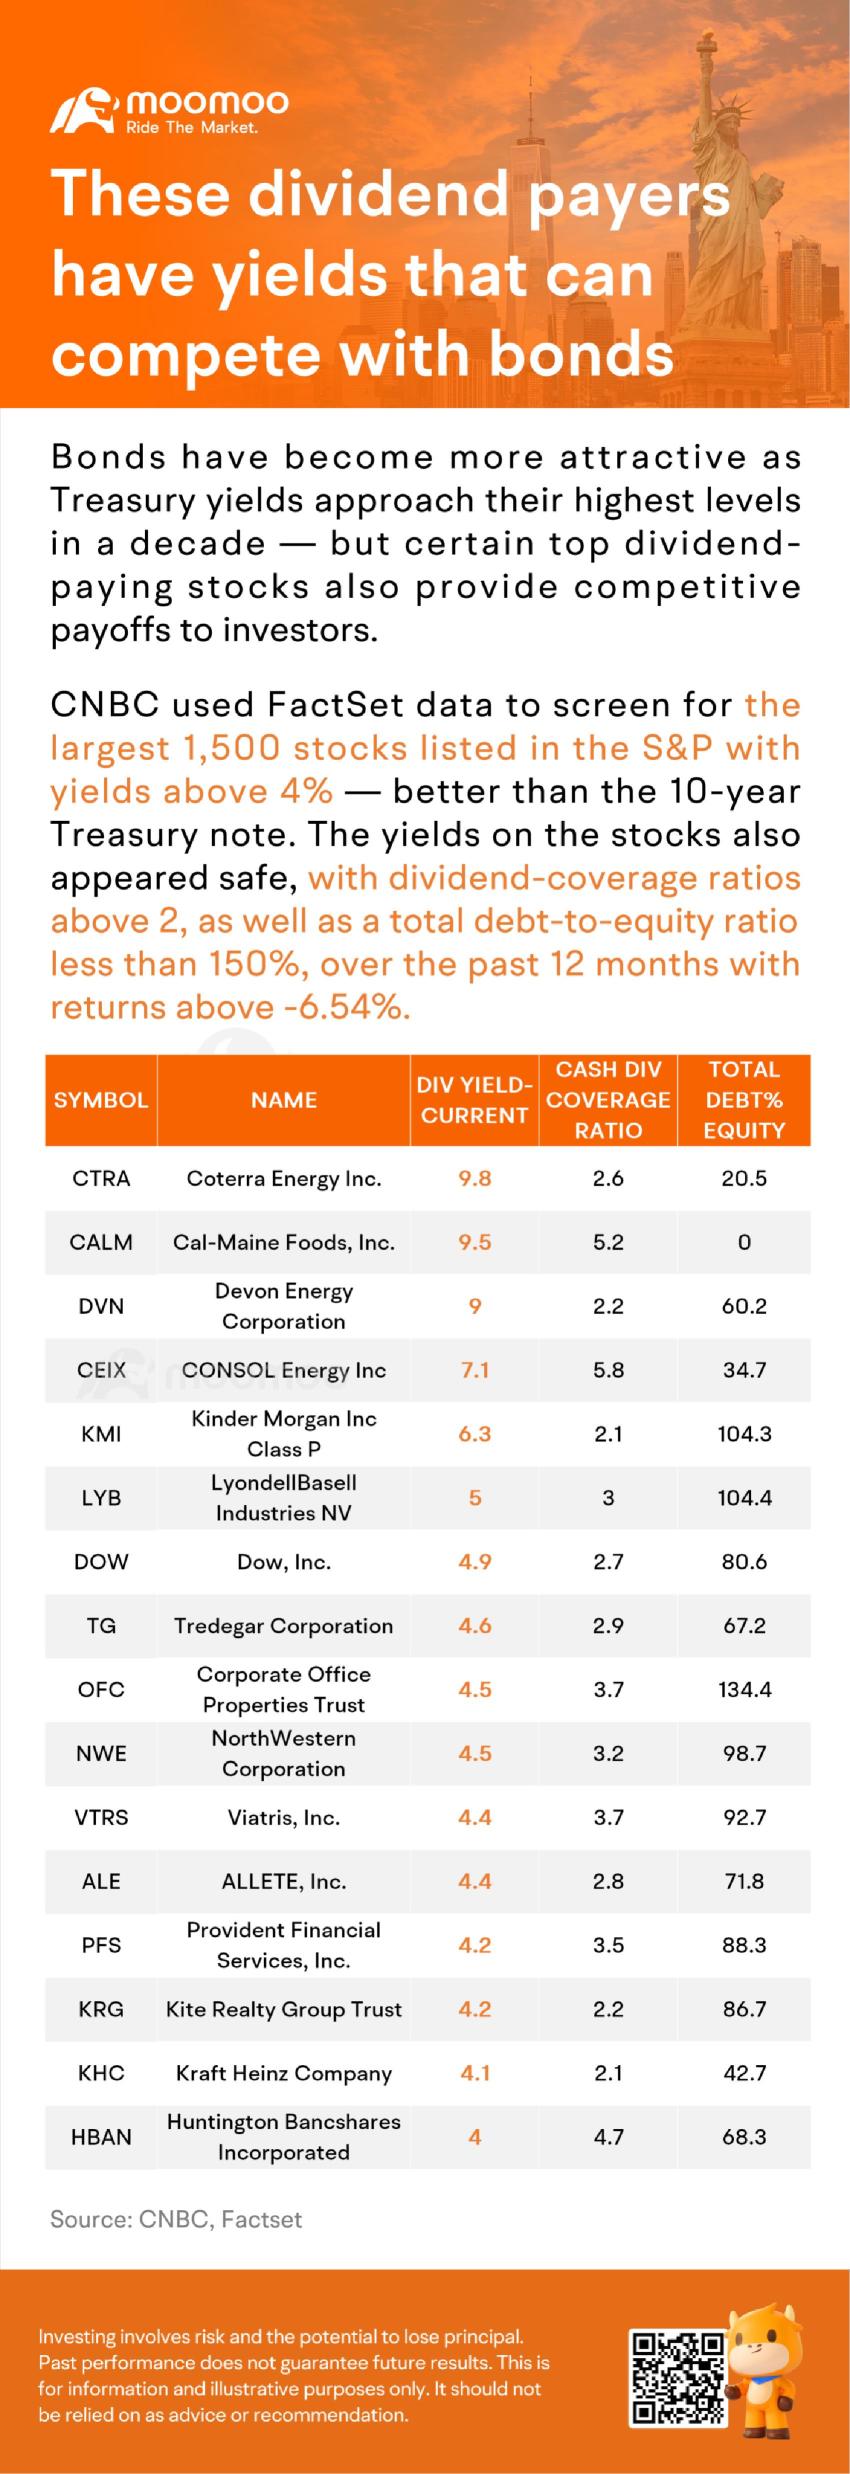 These dividend payers have yields that can compete with bonds